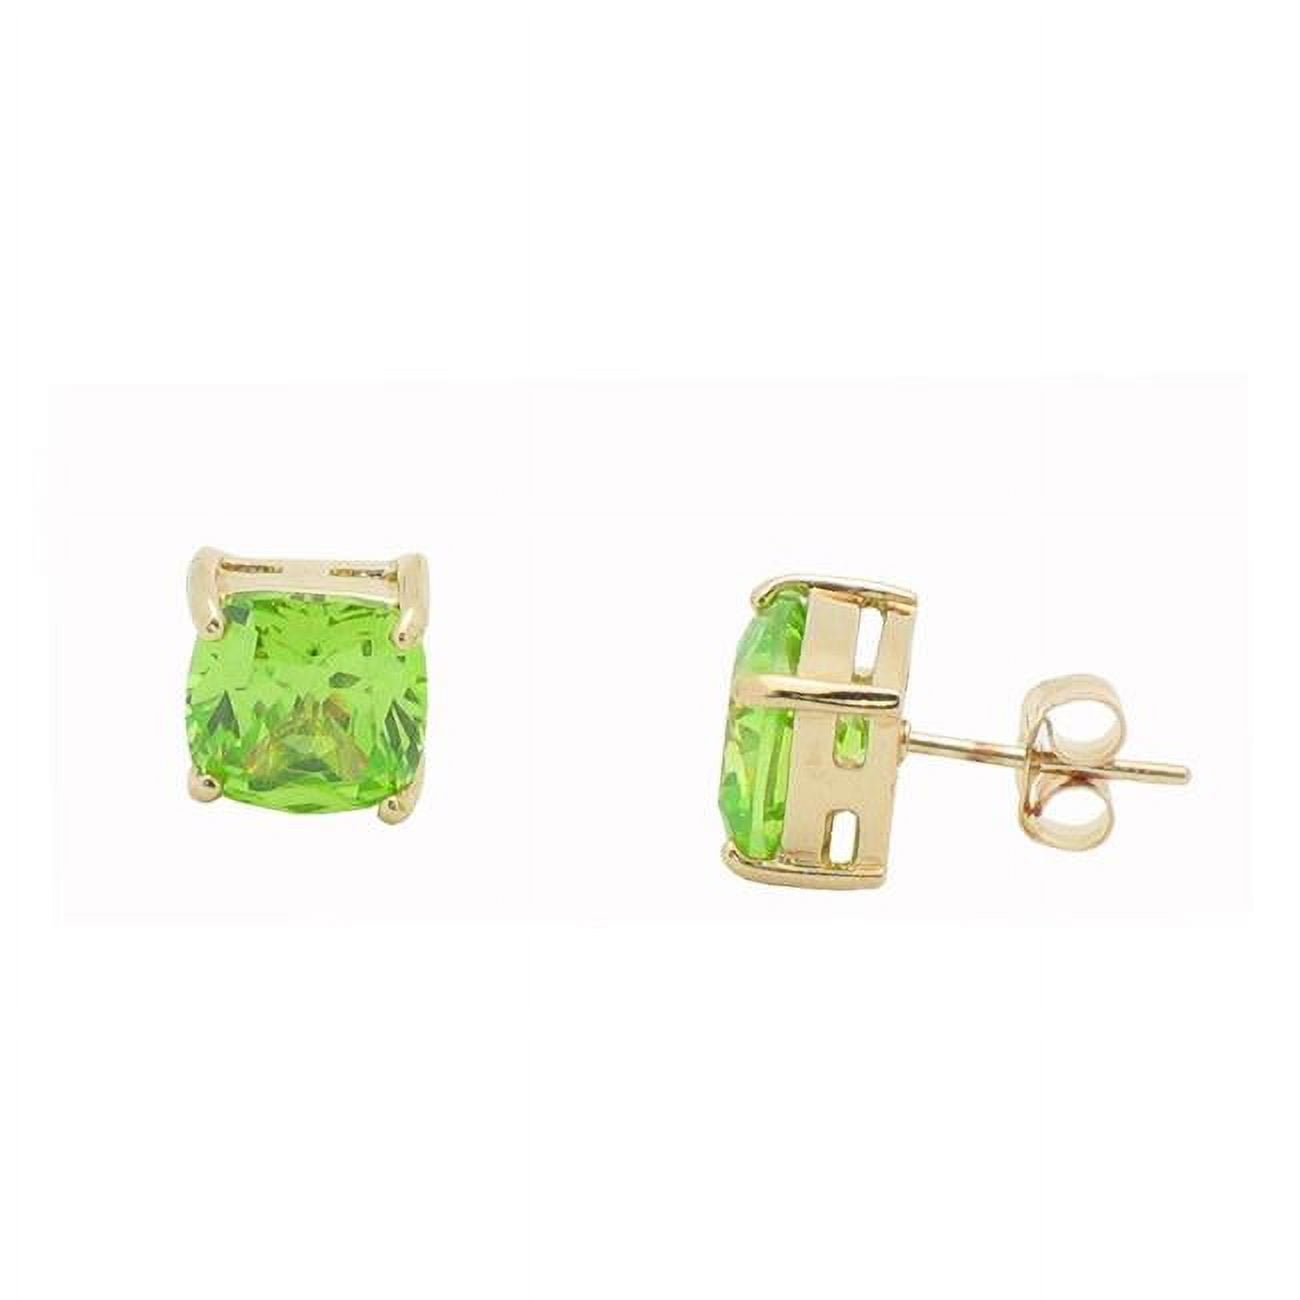 41e362g 7 Mm Sterling Silver Princes Cubic Zirconia Emerald Color Earrings Studs